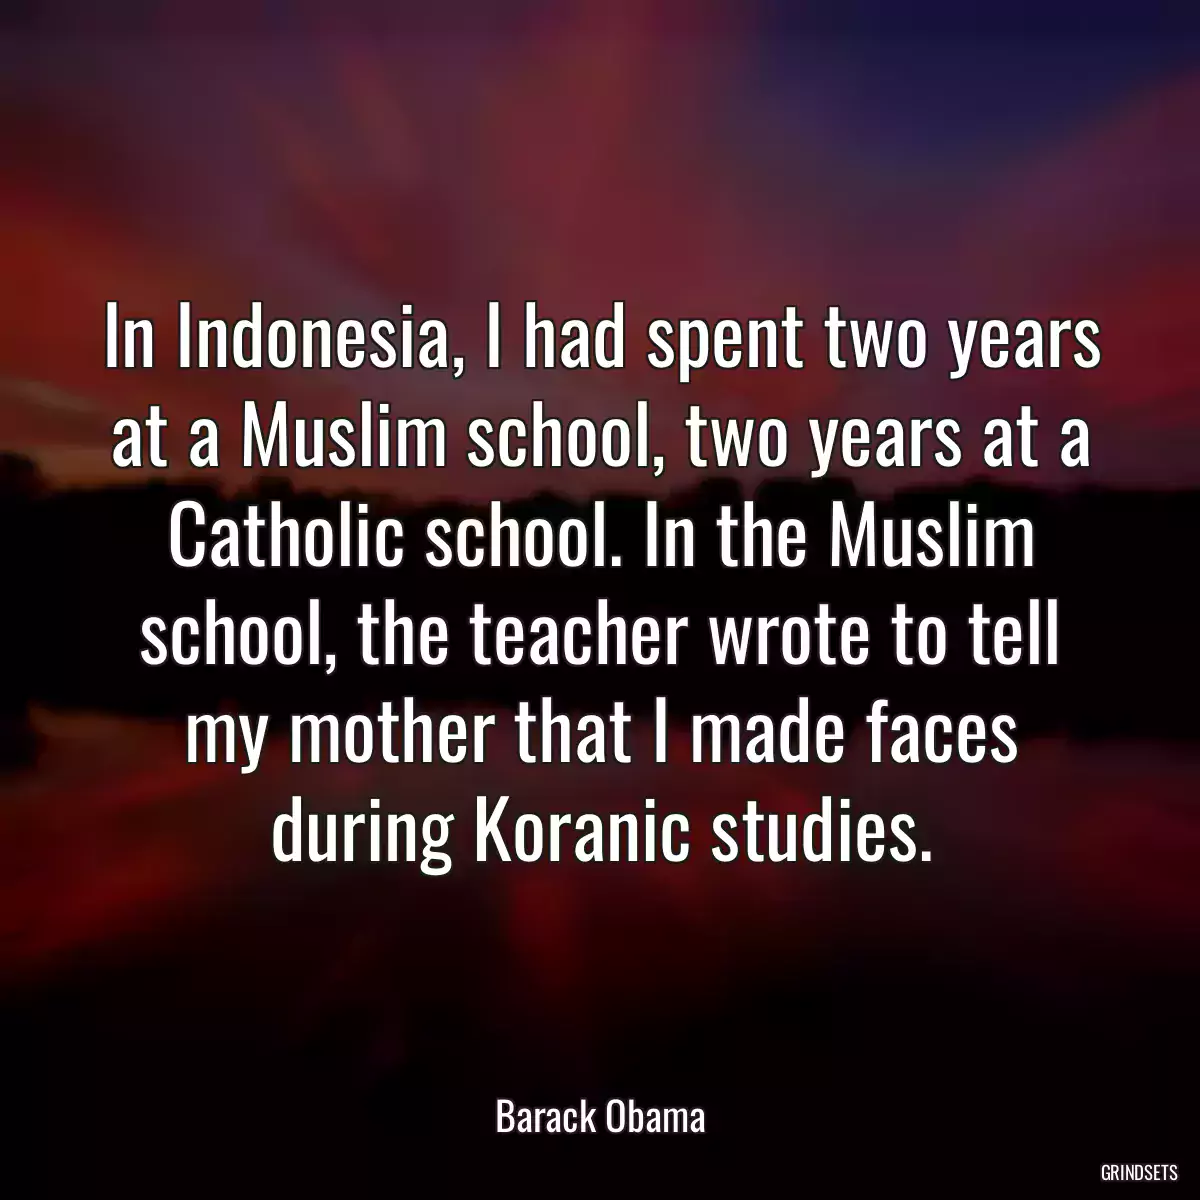 In Indonesia, I had spent two years at a Muslim school, two years at a Catholic school. In the Muslim school, the teacher wrote to tell my mother that I made faces during Koranic studies.